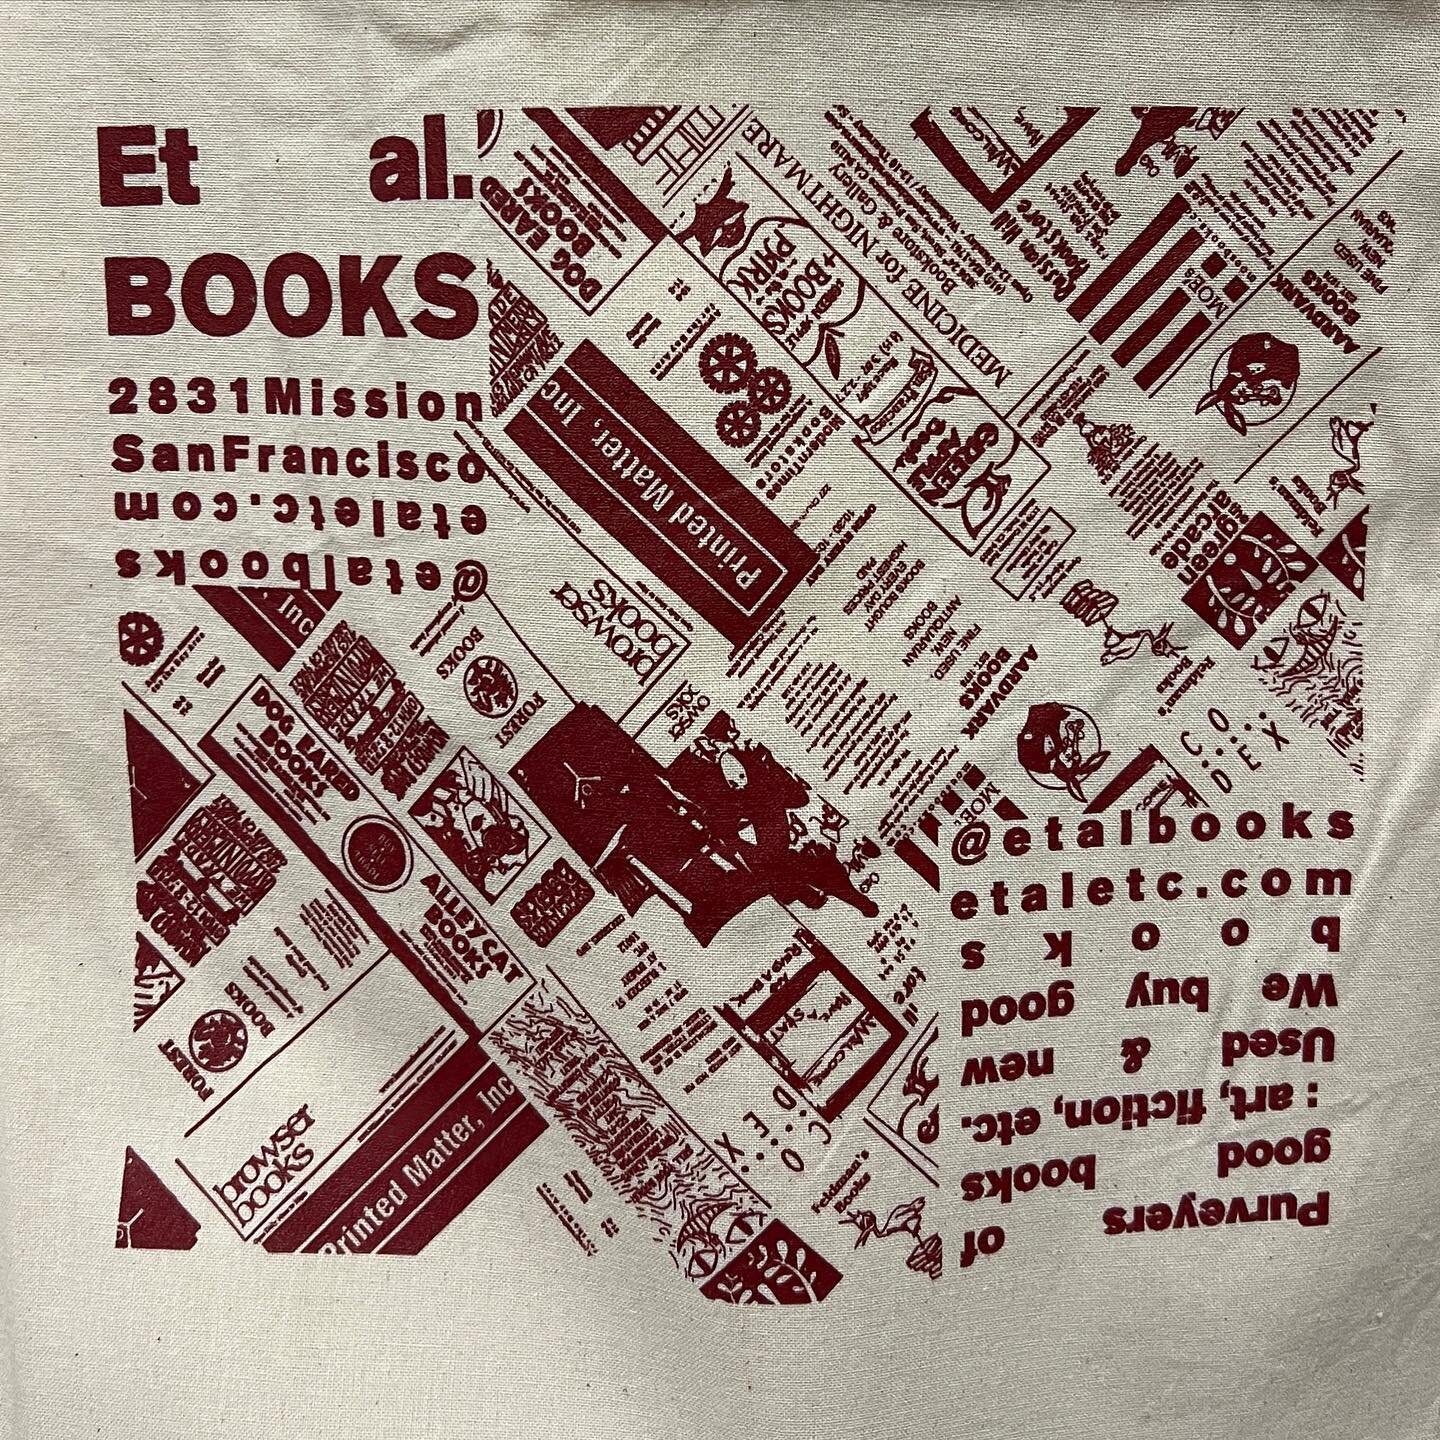 New tote bags are here - free if you buy a bunch of books or $10 if you just want to be the first on your block to sport this lil homage to bookstores we love